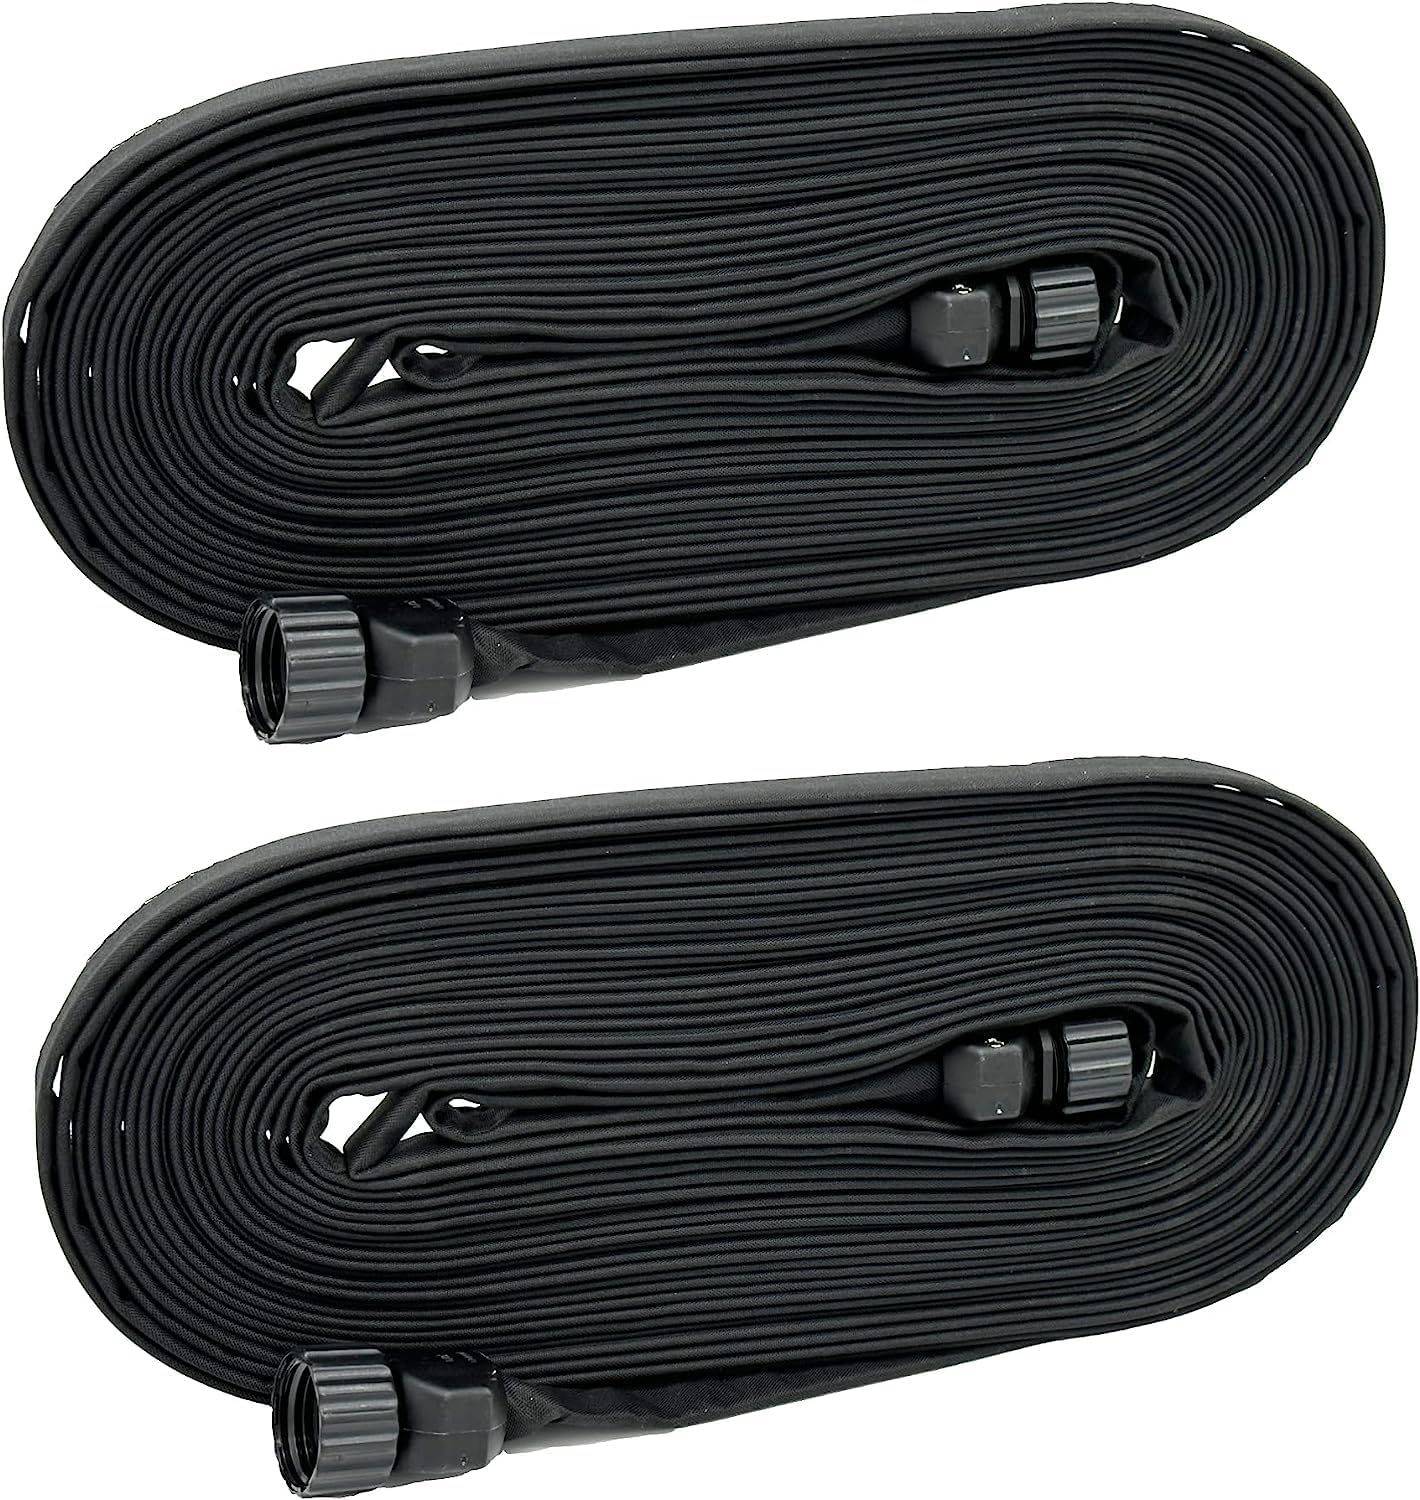 Rocky Mountain Goods Soaker Hose Flat (25’ Pack of 2) [...]